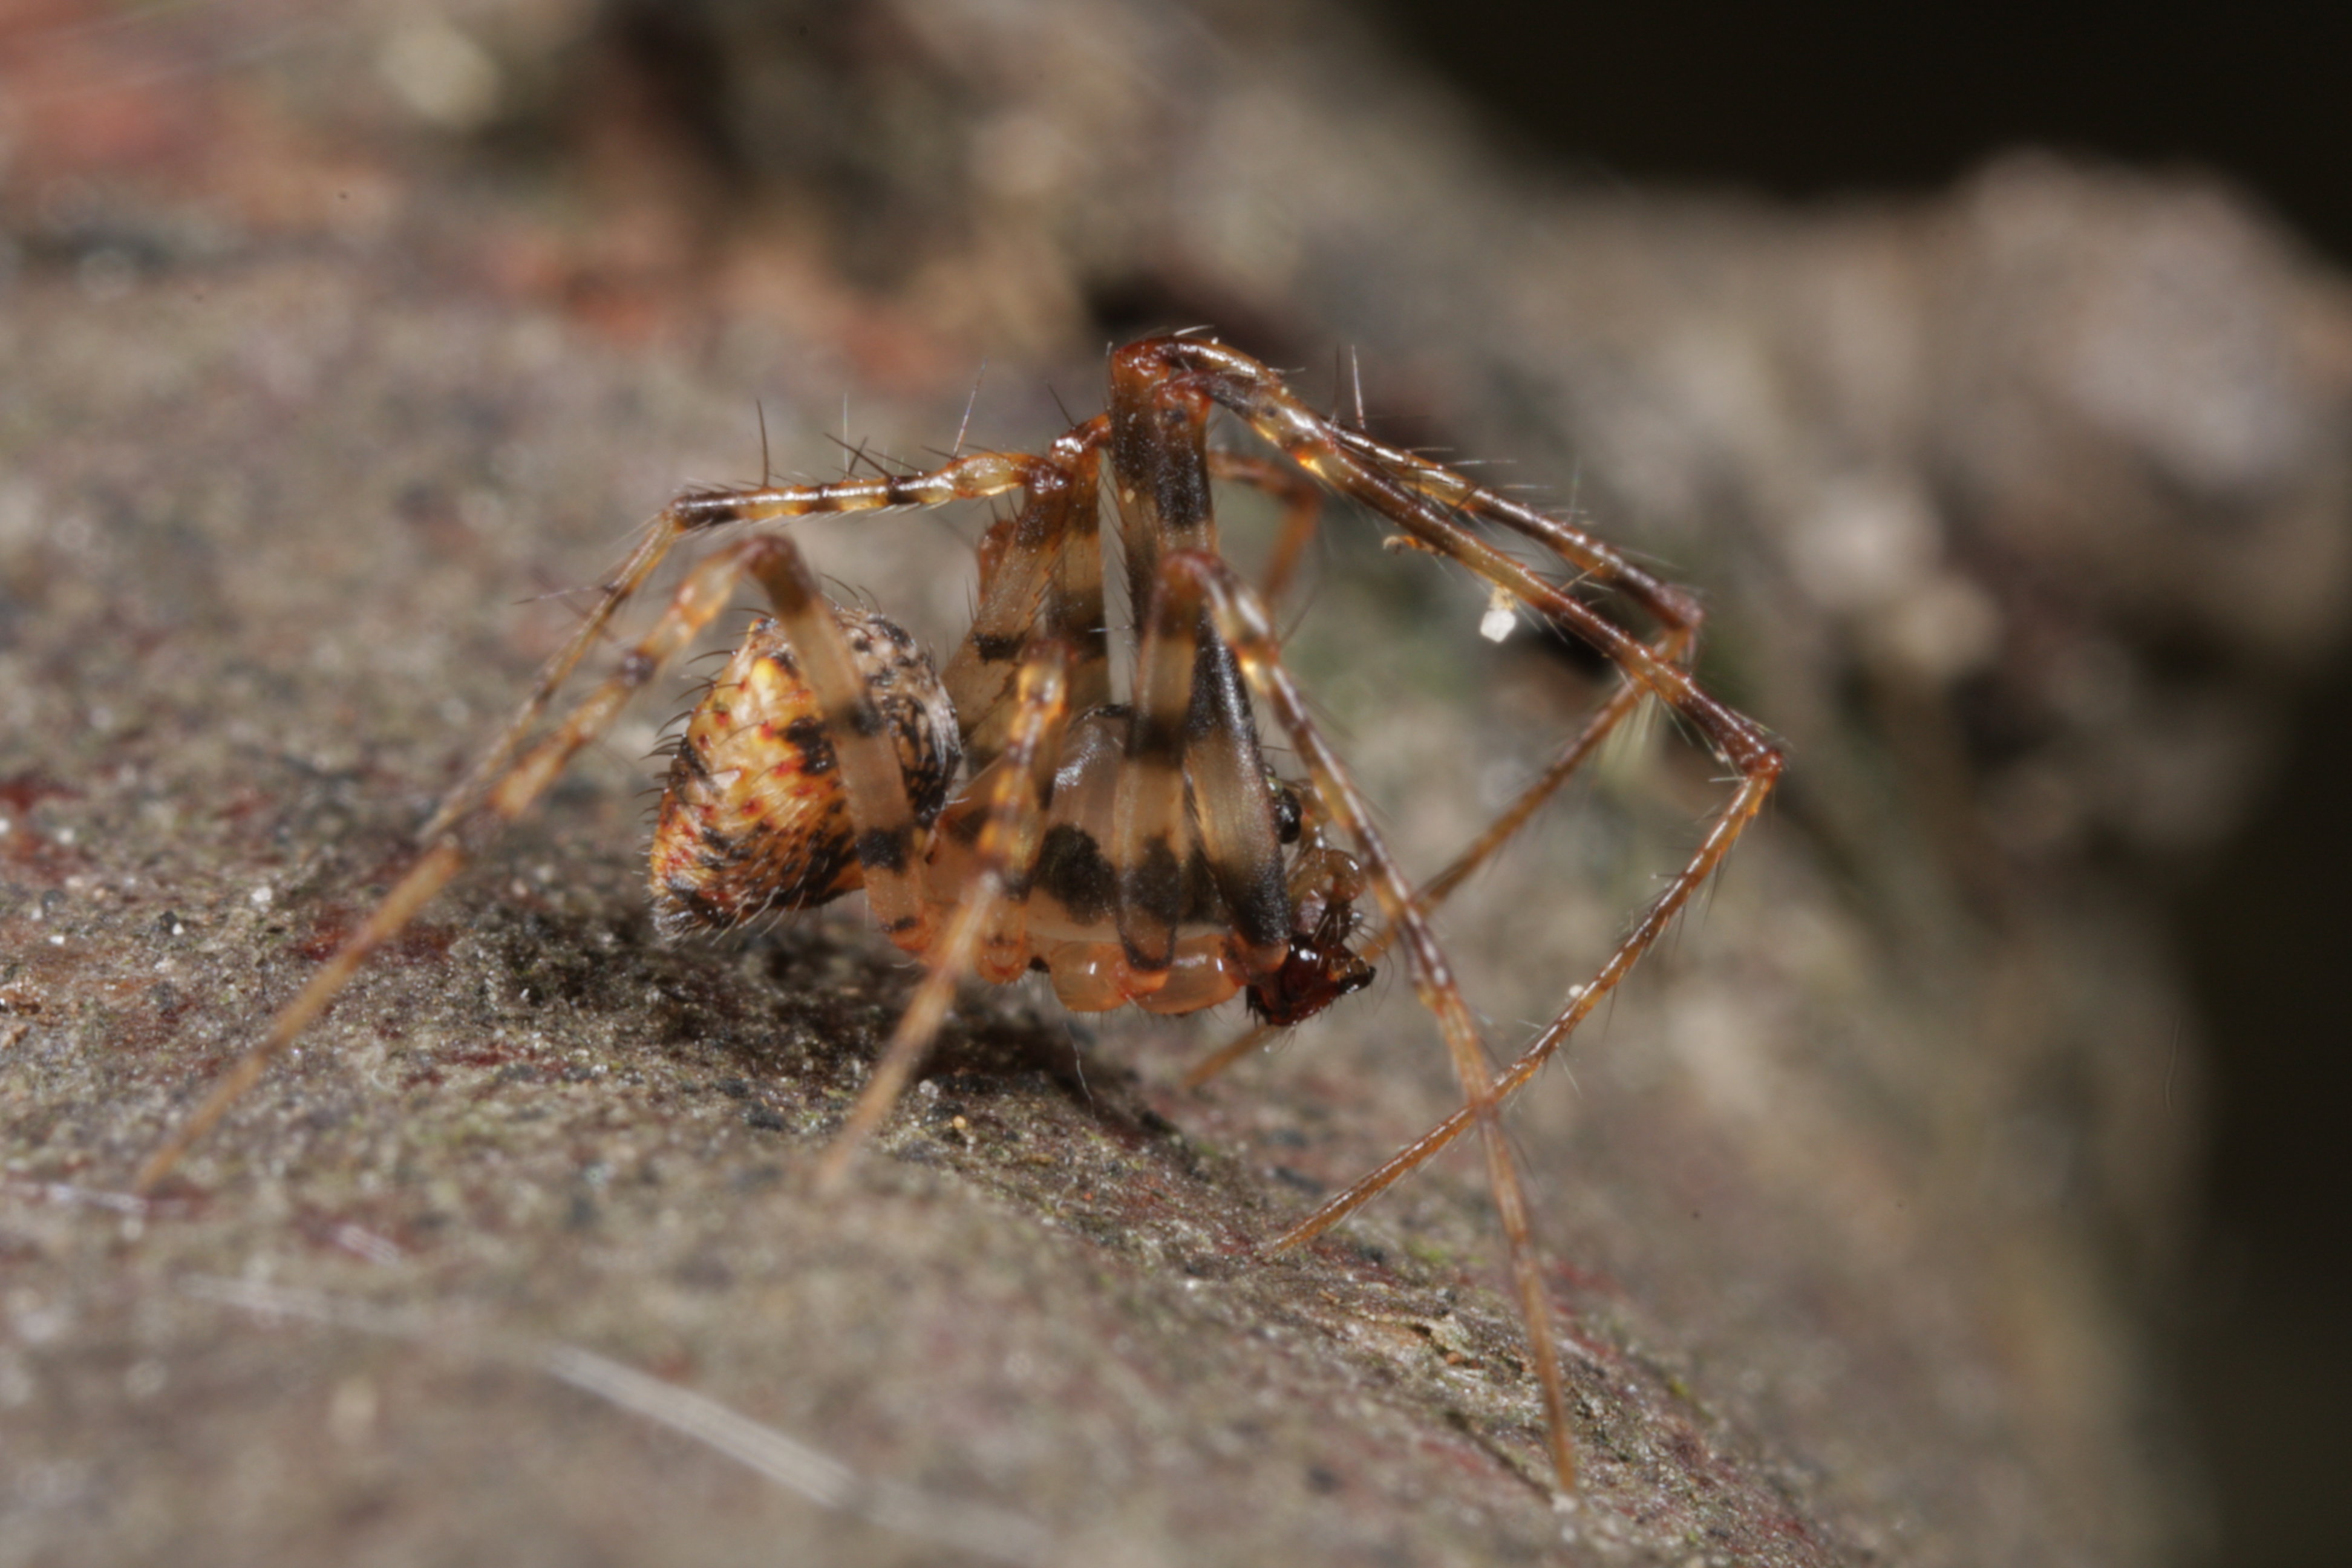 Male pirate spider in lateral view (Photo: G. Loos)